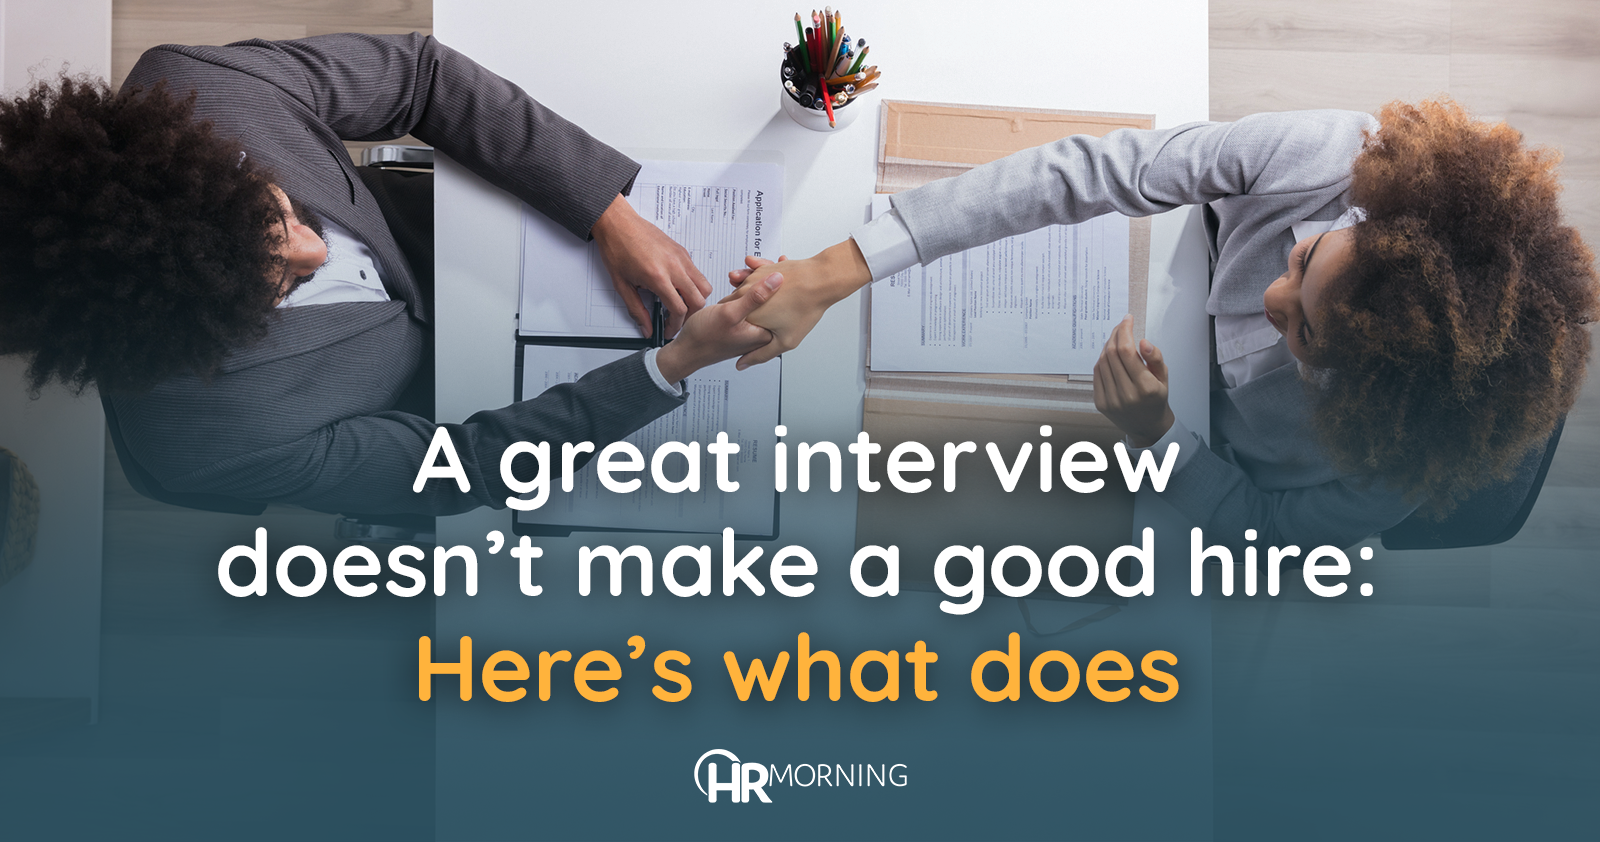 A great interview doesn't make a good hire: Here's what does